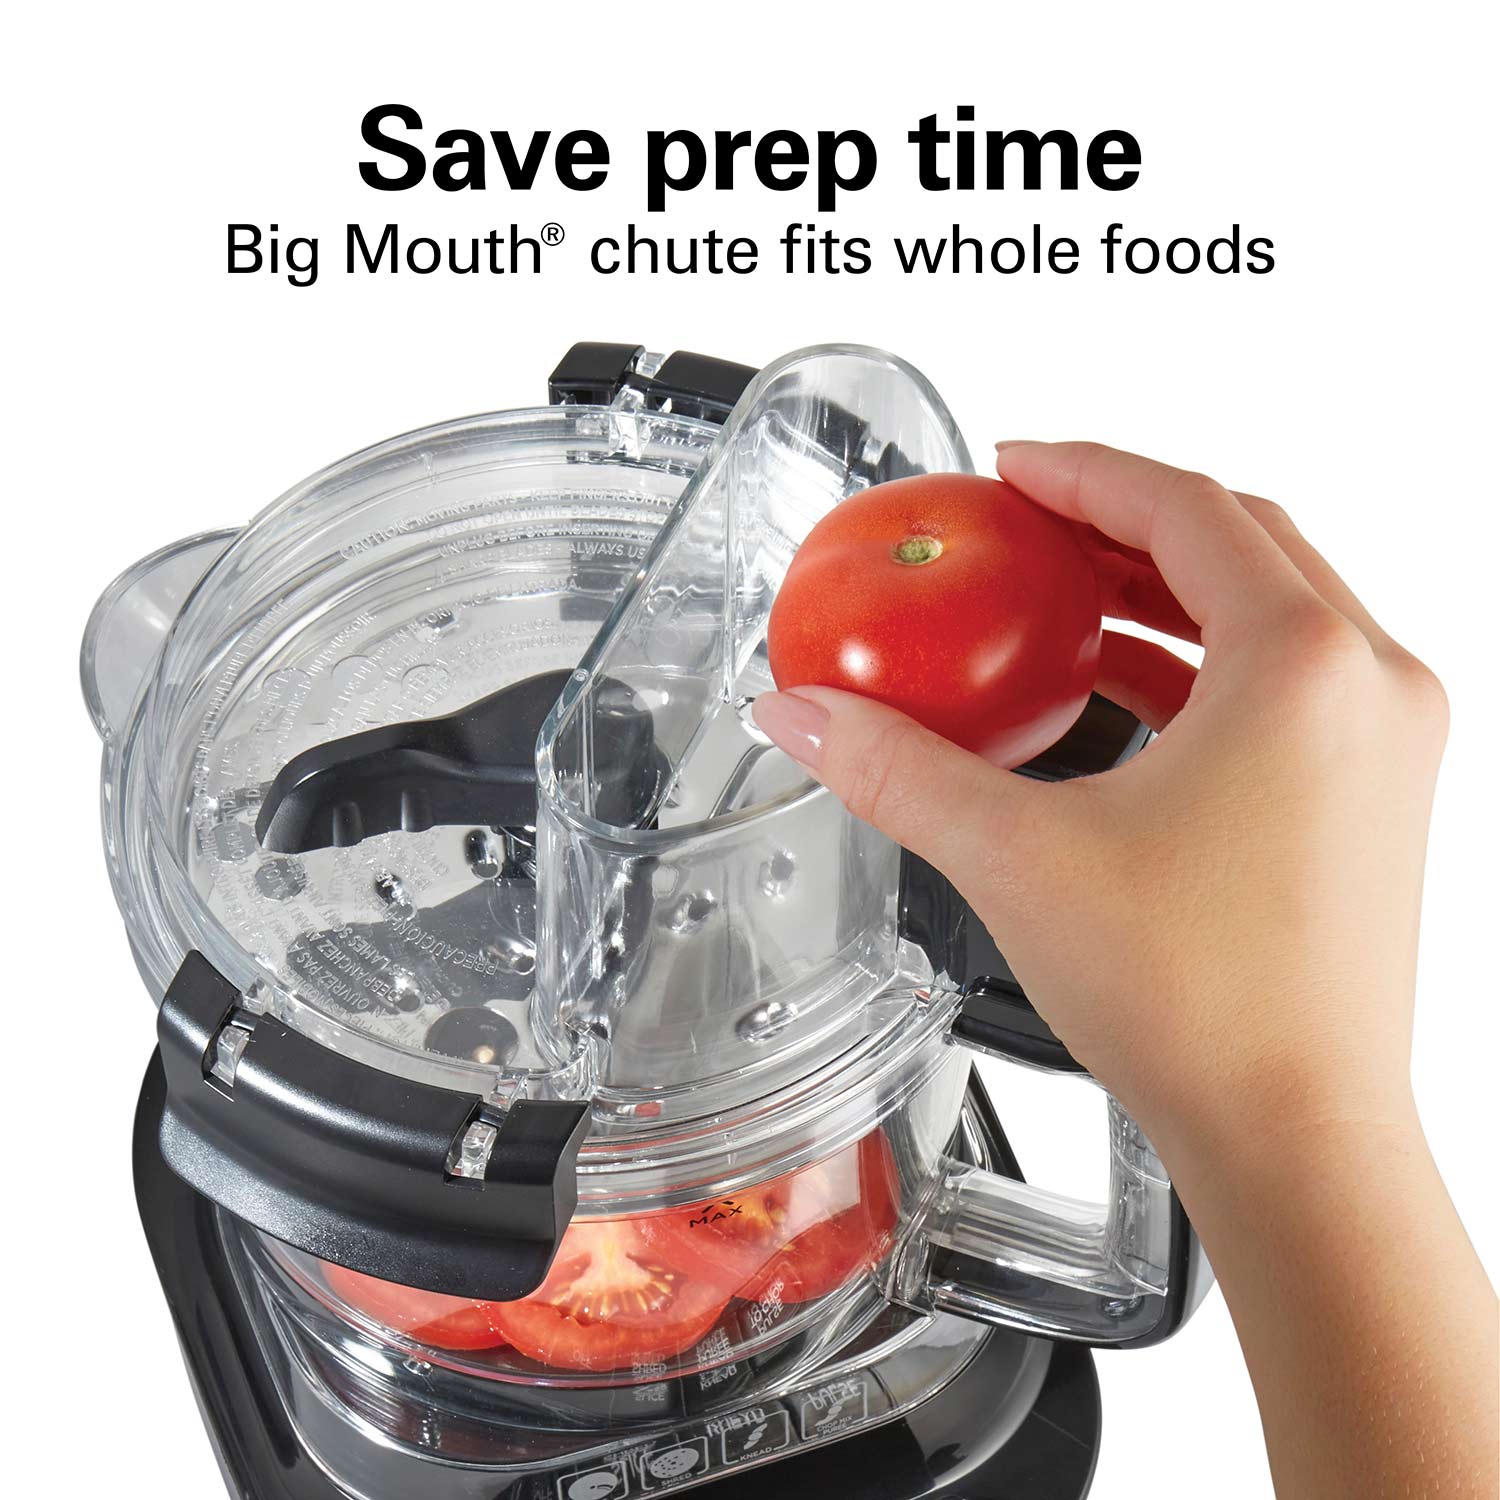 Hamilton Beach 10-Cup Stack & Snap™ Food Processor with Bowl